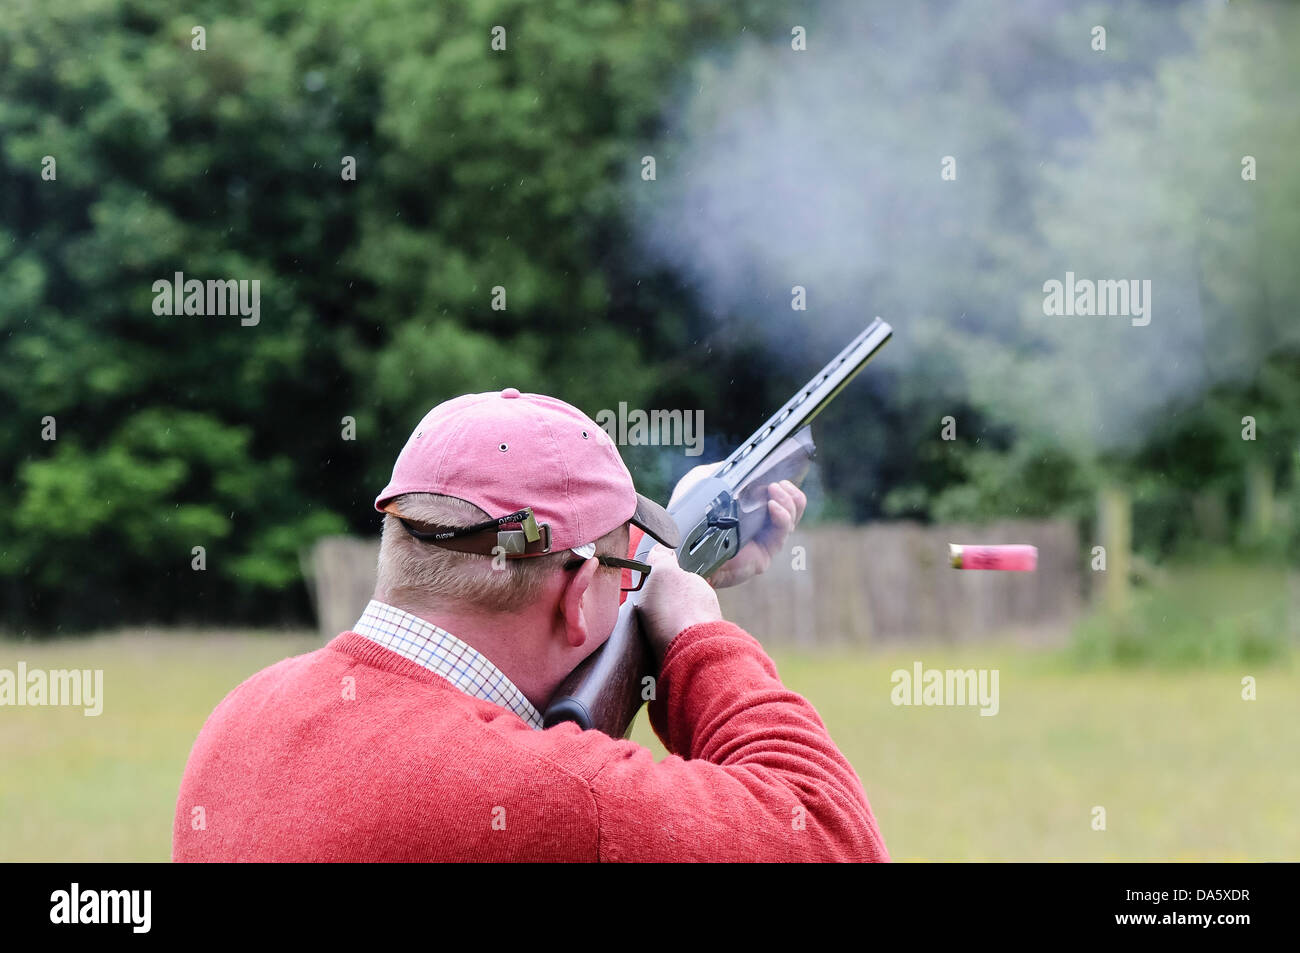 A spent shell is ejected from the gun as a man fires a shotgun while shooting clay pigeons Stock Photo